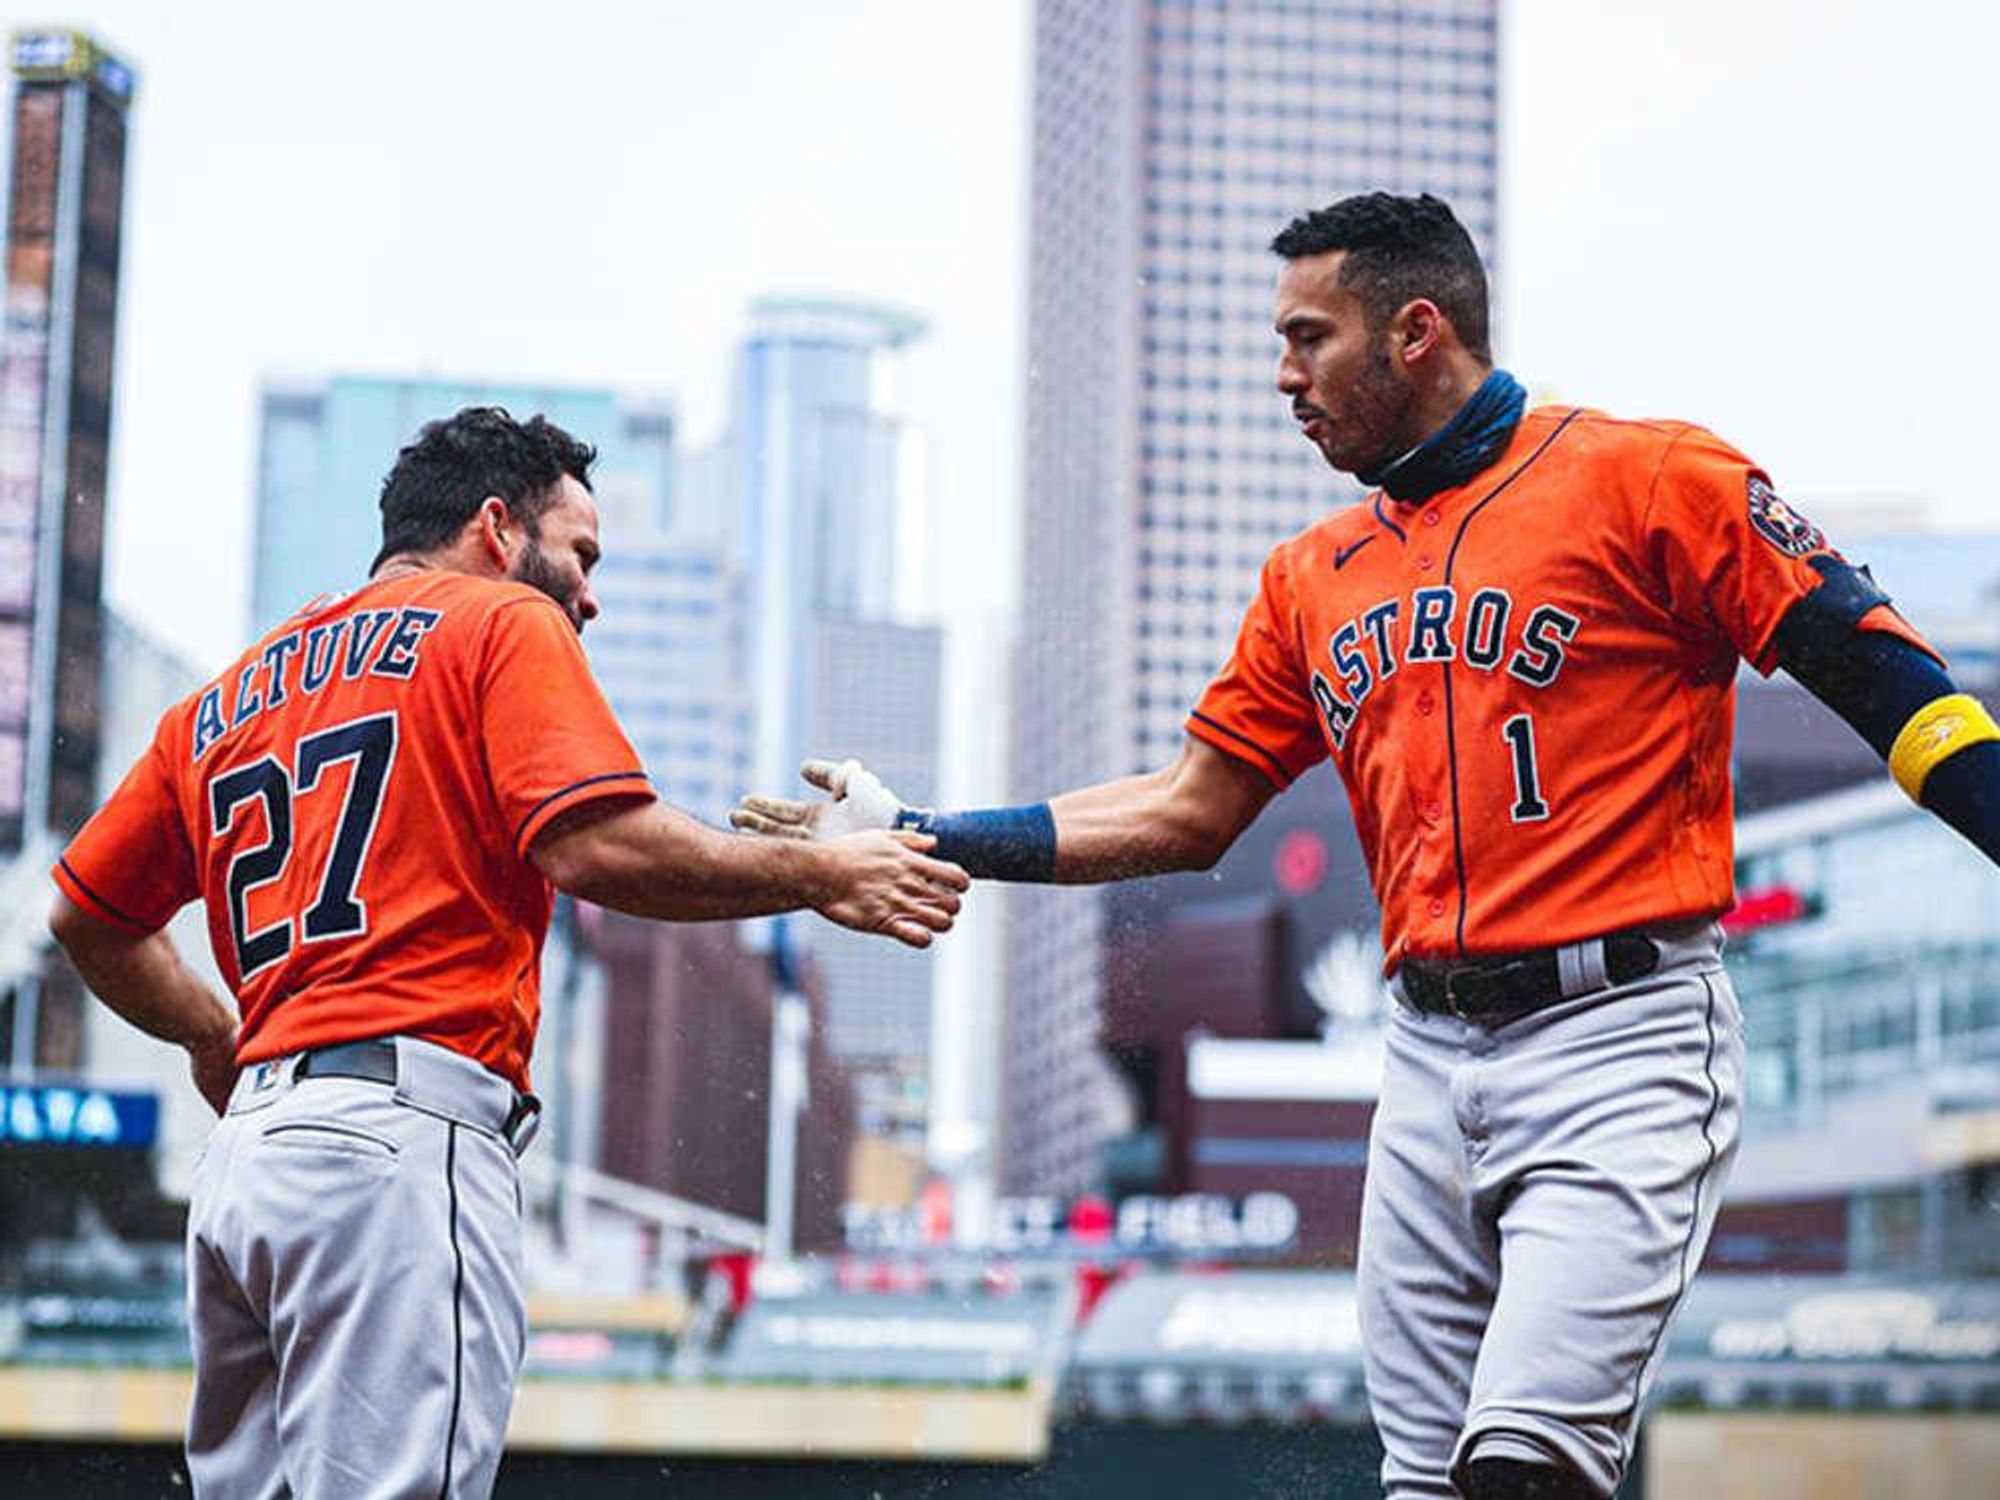 The Best and Worst Uniforms of All Time: The Houston Astros - NBC